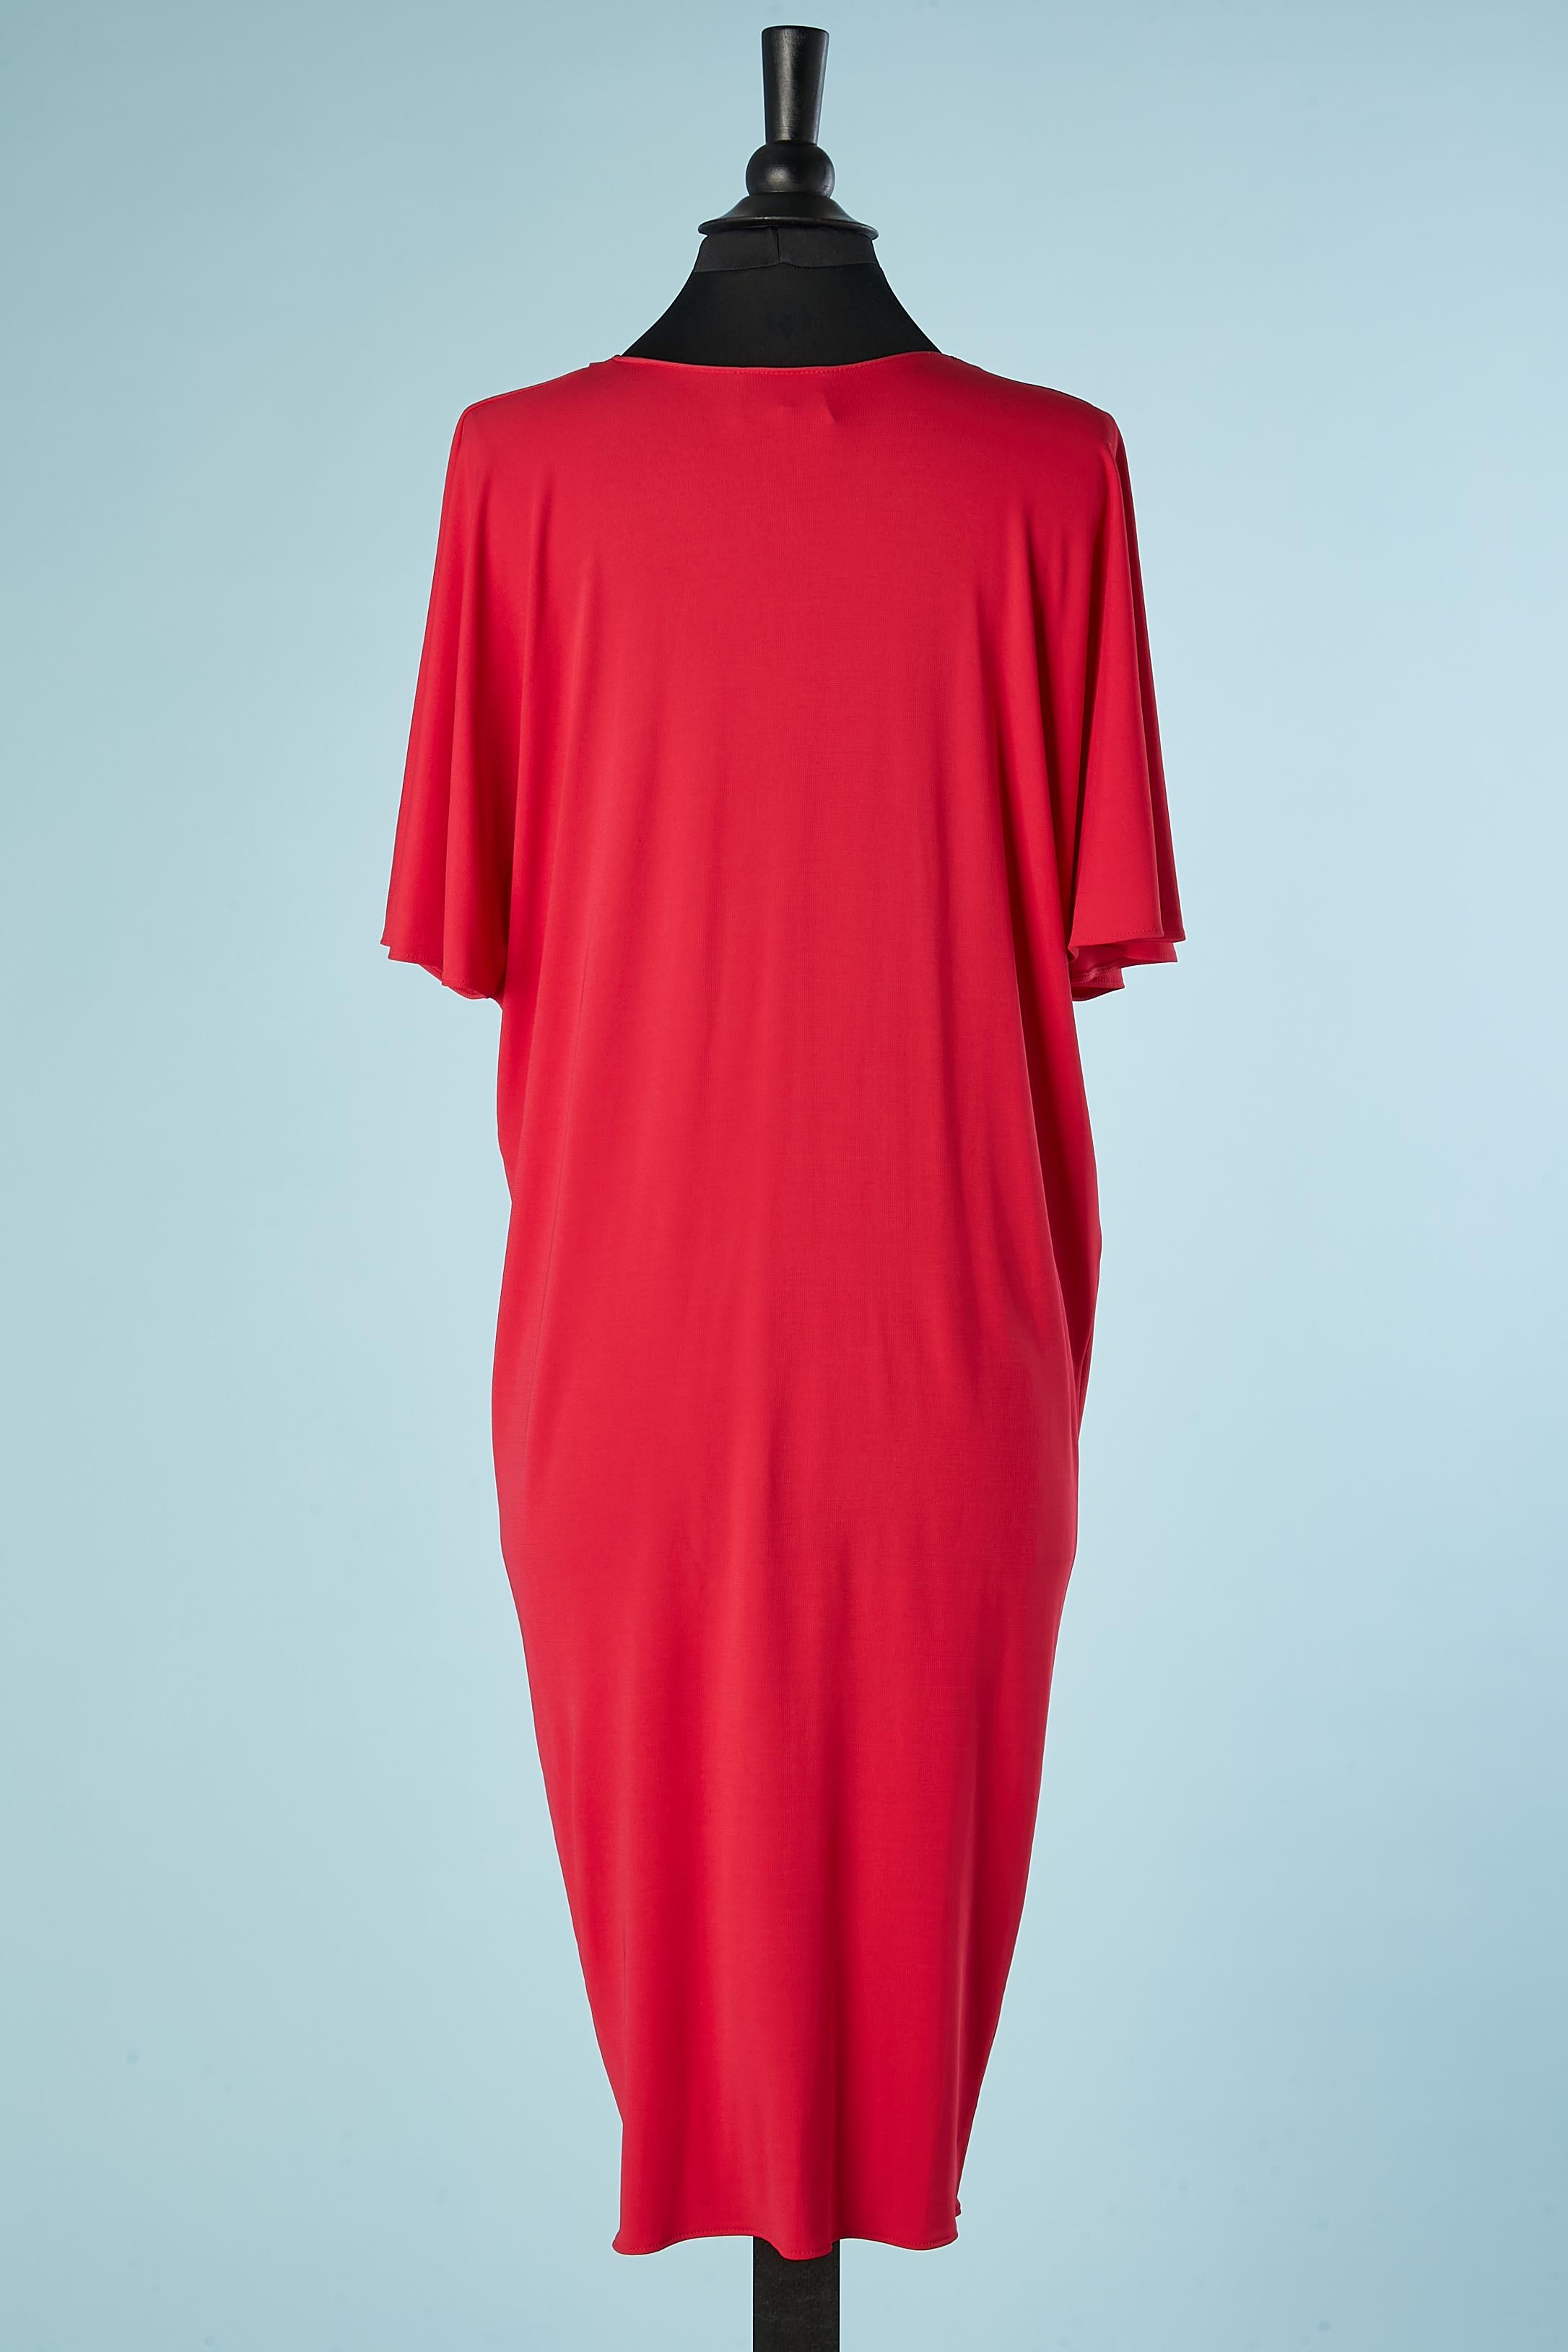 Red jersey cocktail dress draped in the front Lanvin par Alber Elbaz FW 2015 For Sale 2